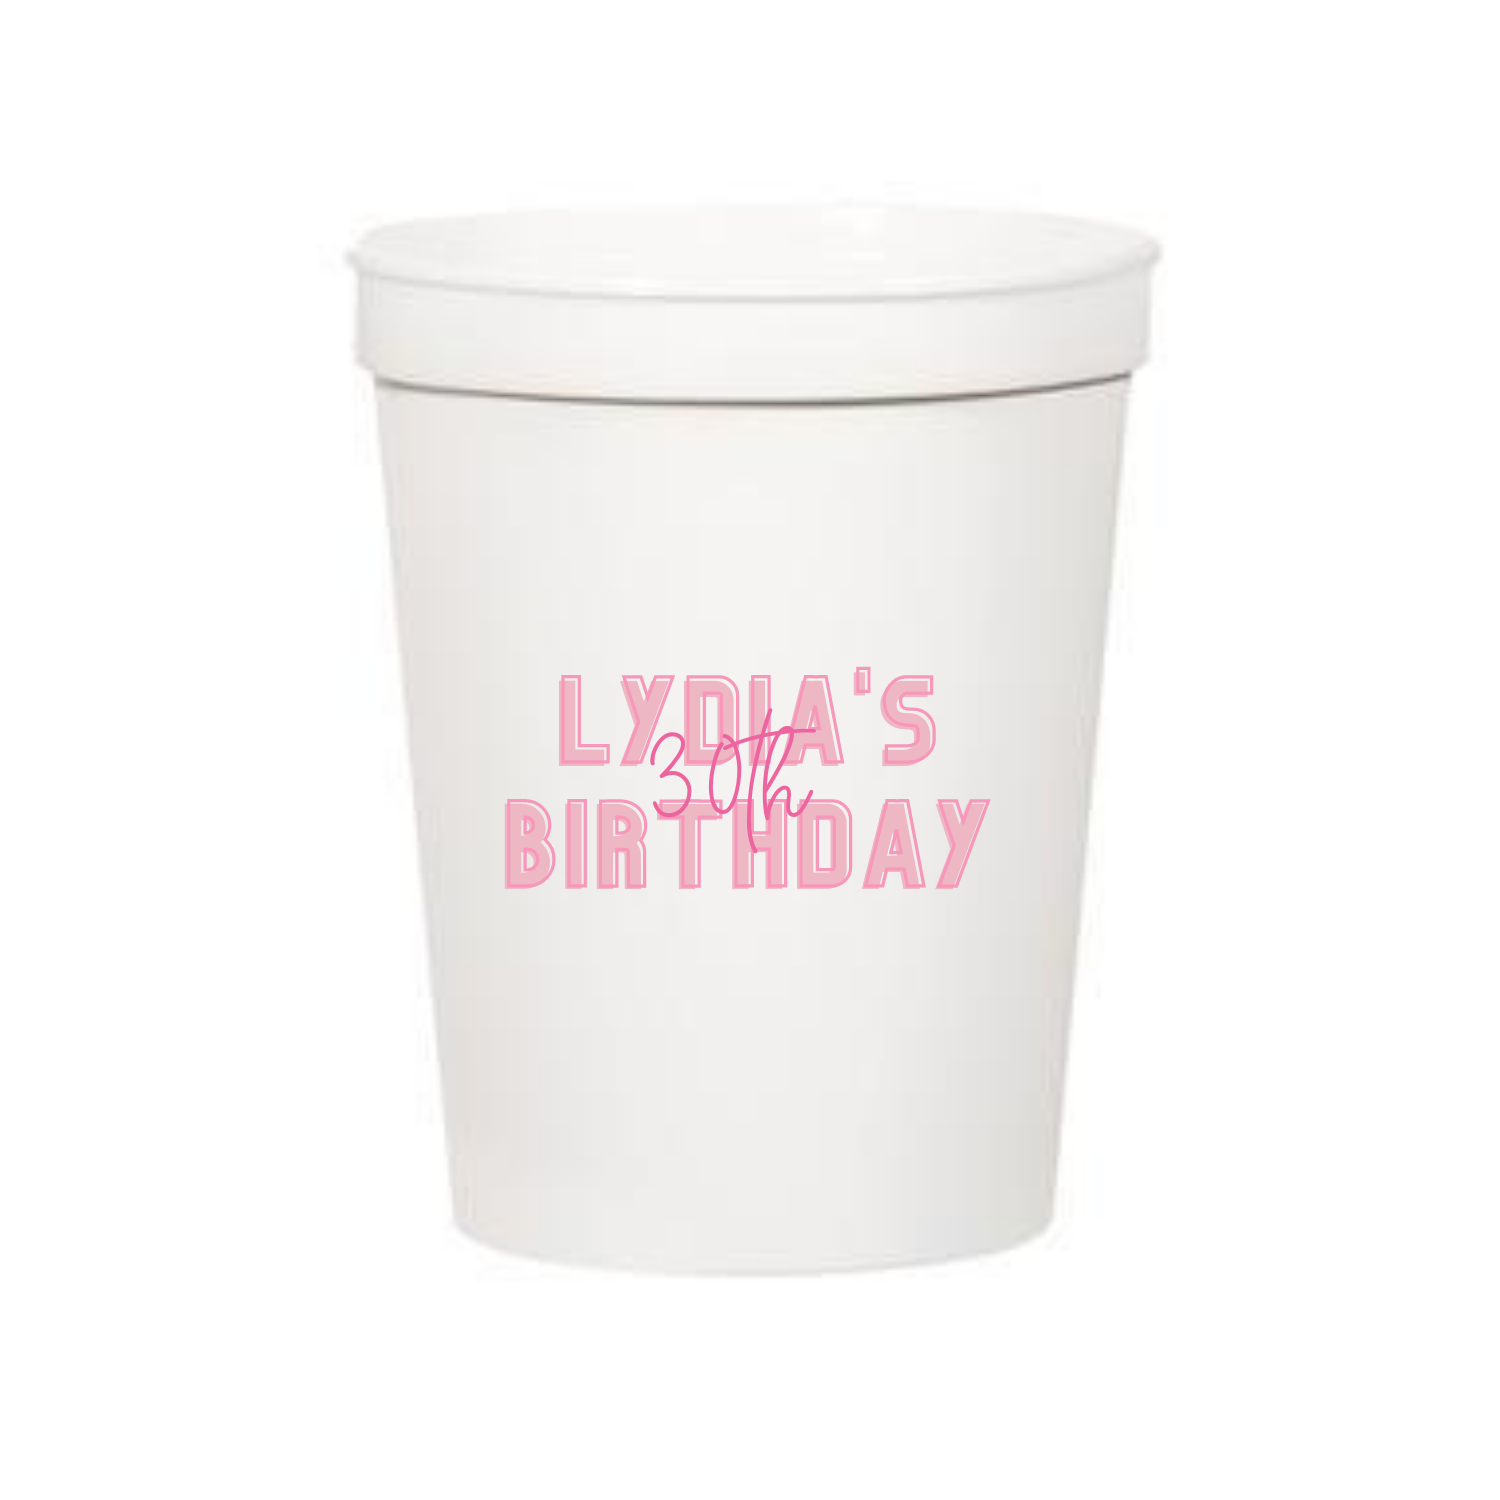 A white stadium cup is customized with a 30th birthday design